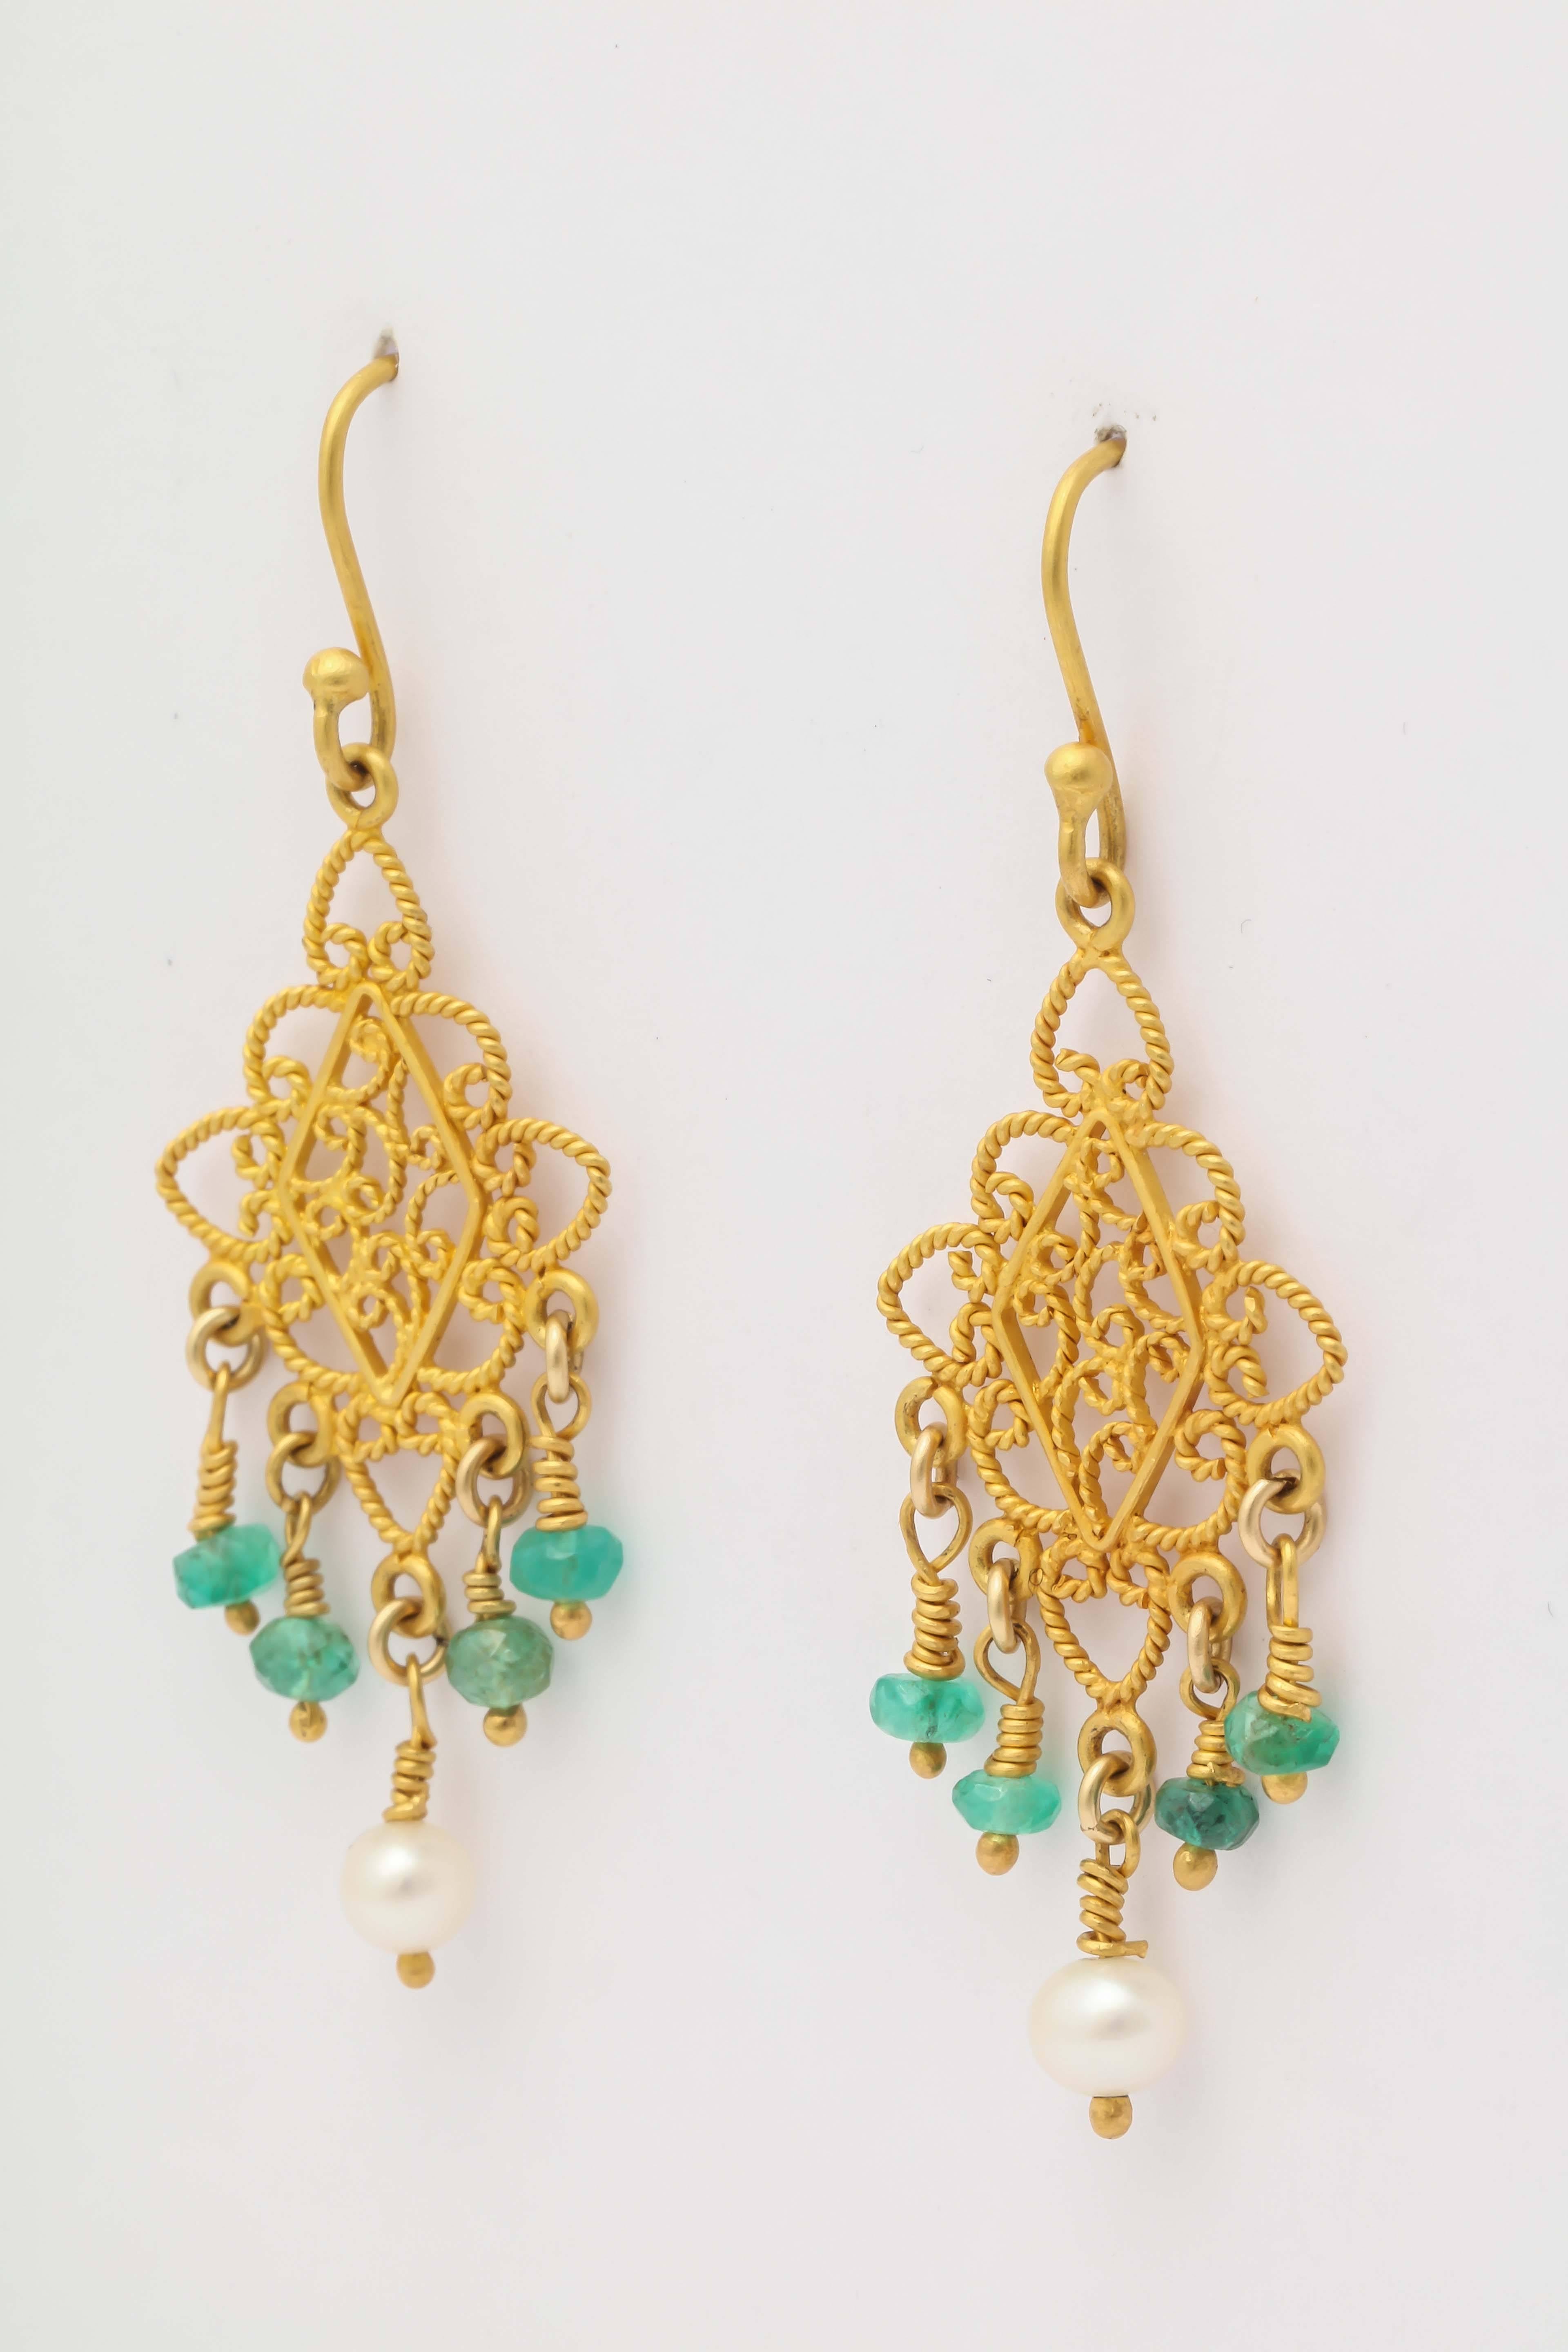 These are an elegant and classic design.  The earrings are 18 kt and plated with 24 kt. The color is extremely rich and goes well with the precious emerald  beads.
The total length from the top of the wire to the pearl is approximately 2 in. and